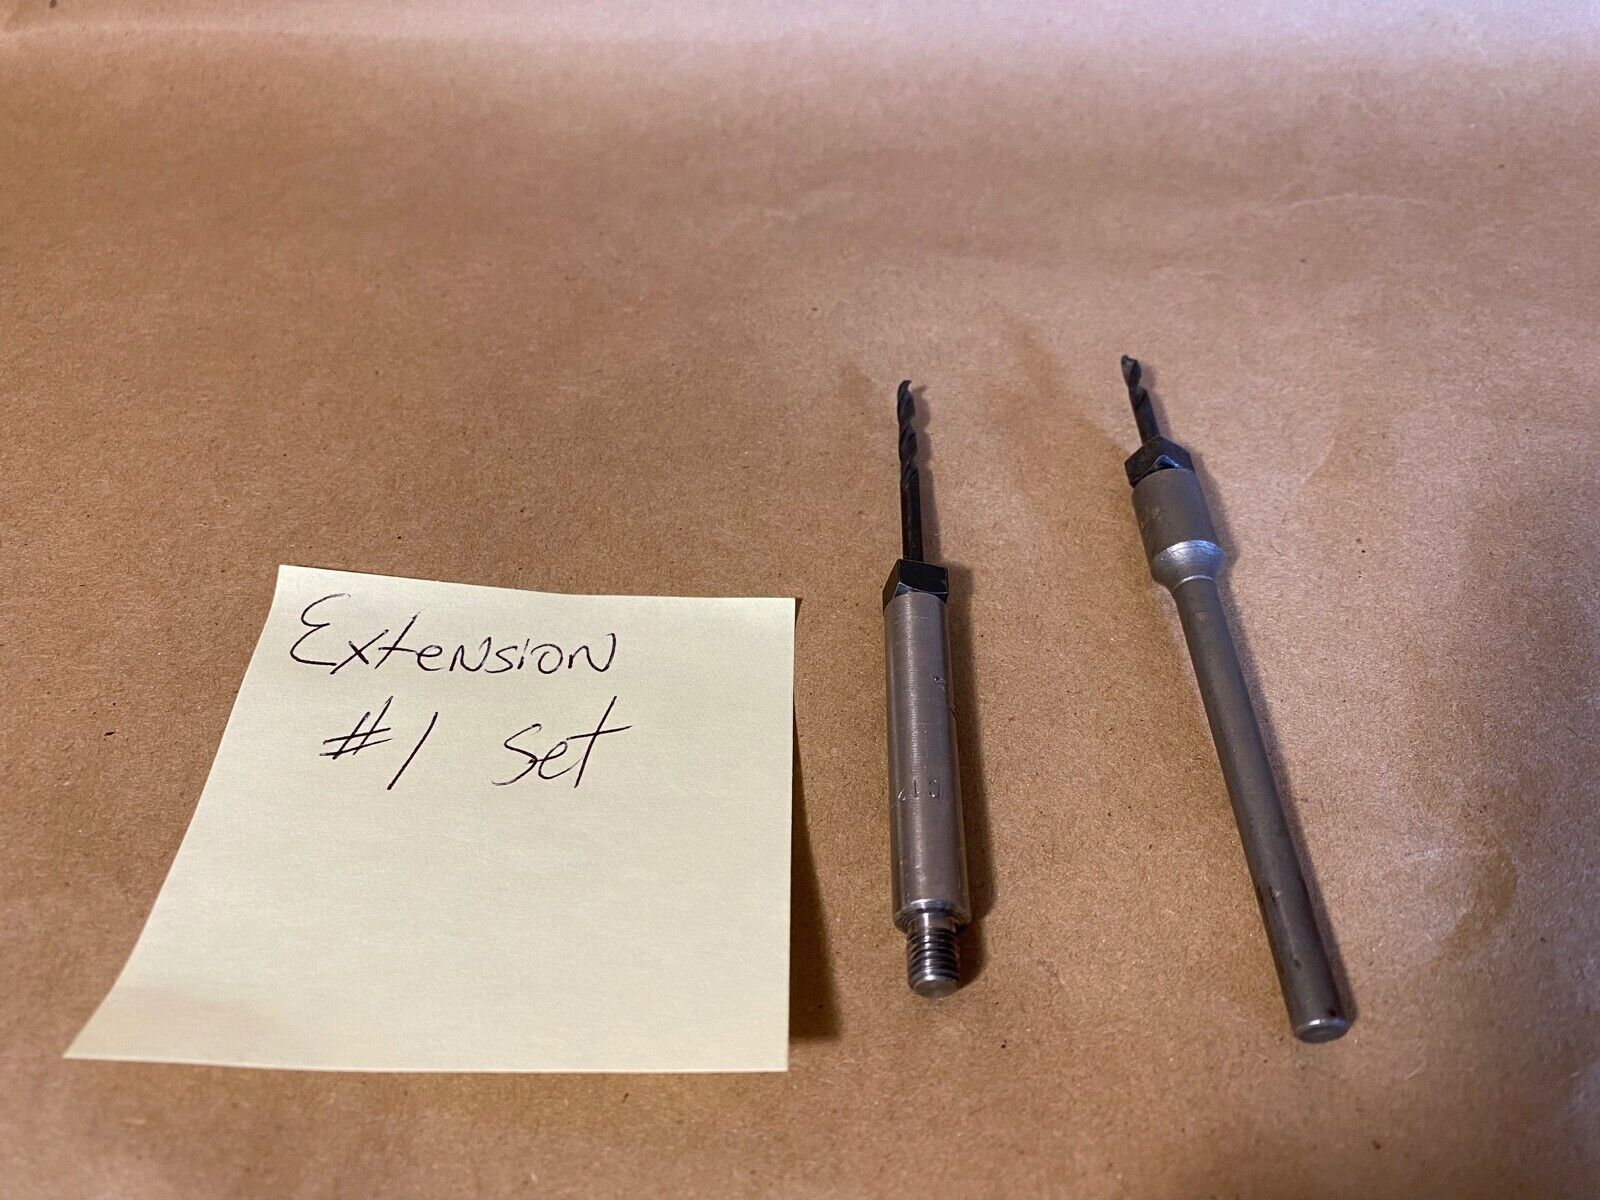 Core Drill and Threaded  Drill Bit Extensions set  #1 SET Unbranded n/a